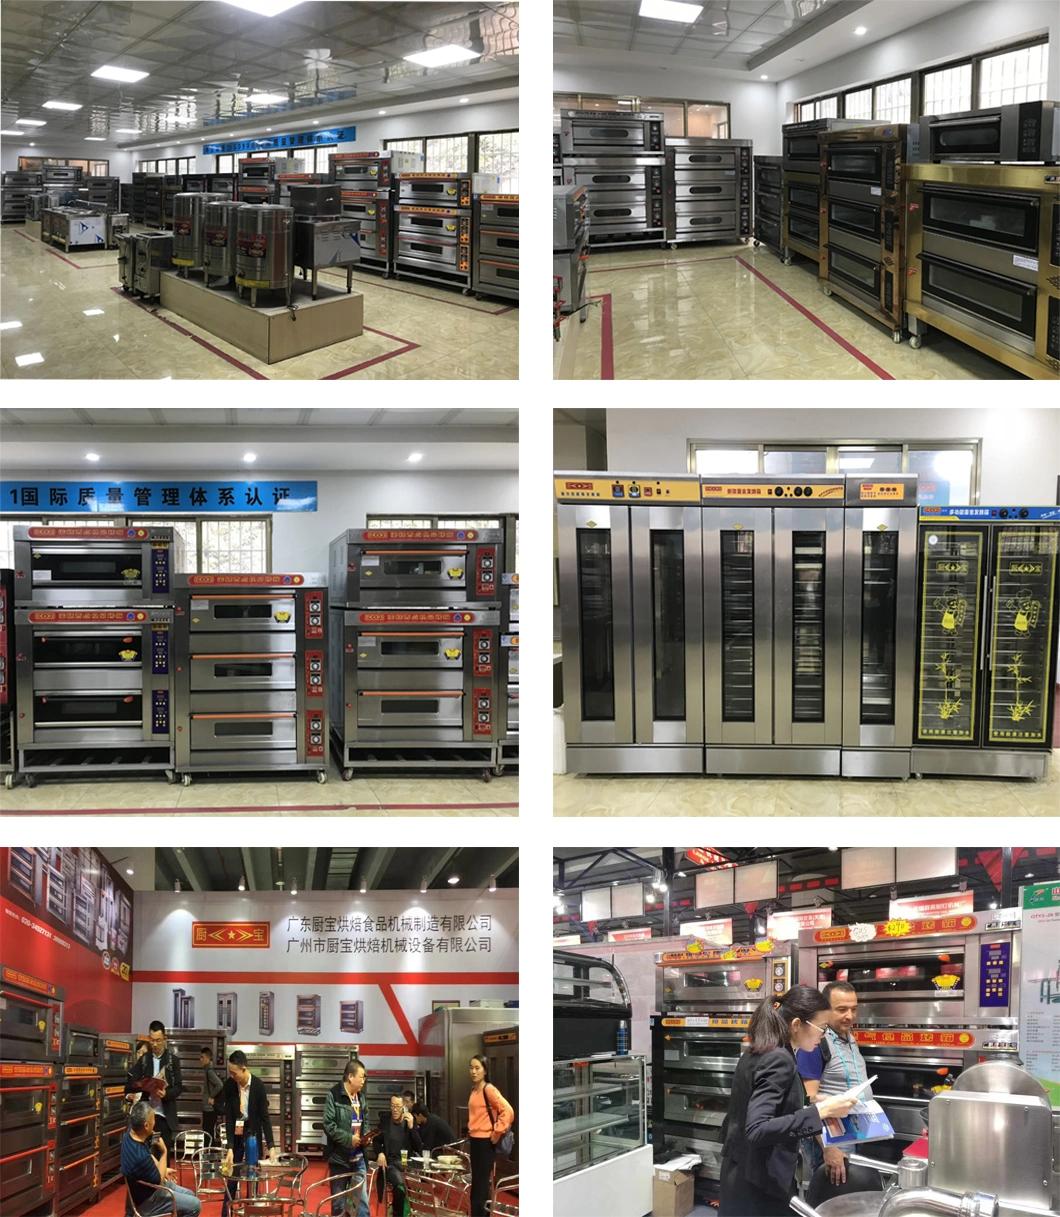 1 Deck 2 Trays Luxury Electric Oven for Commercial Kitchen Baking Equipment Food Machinery Bakery Machine with Computer Controller Food Oven